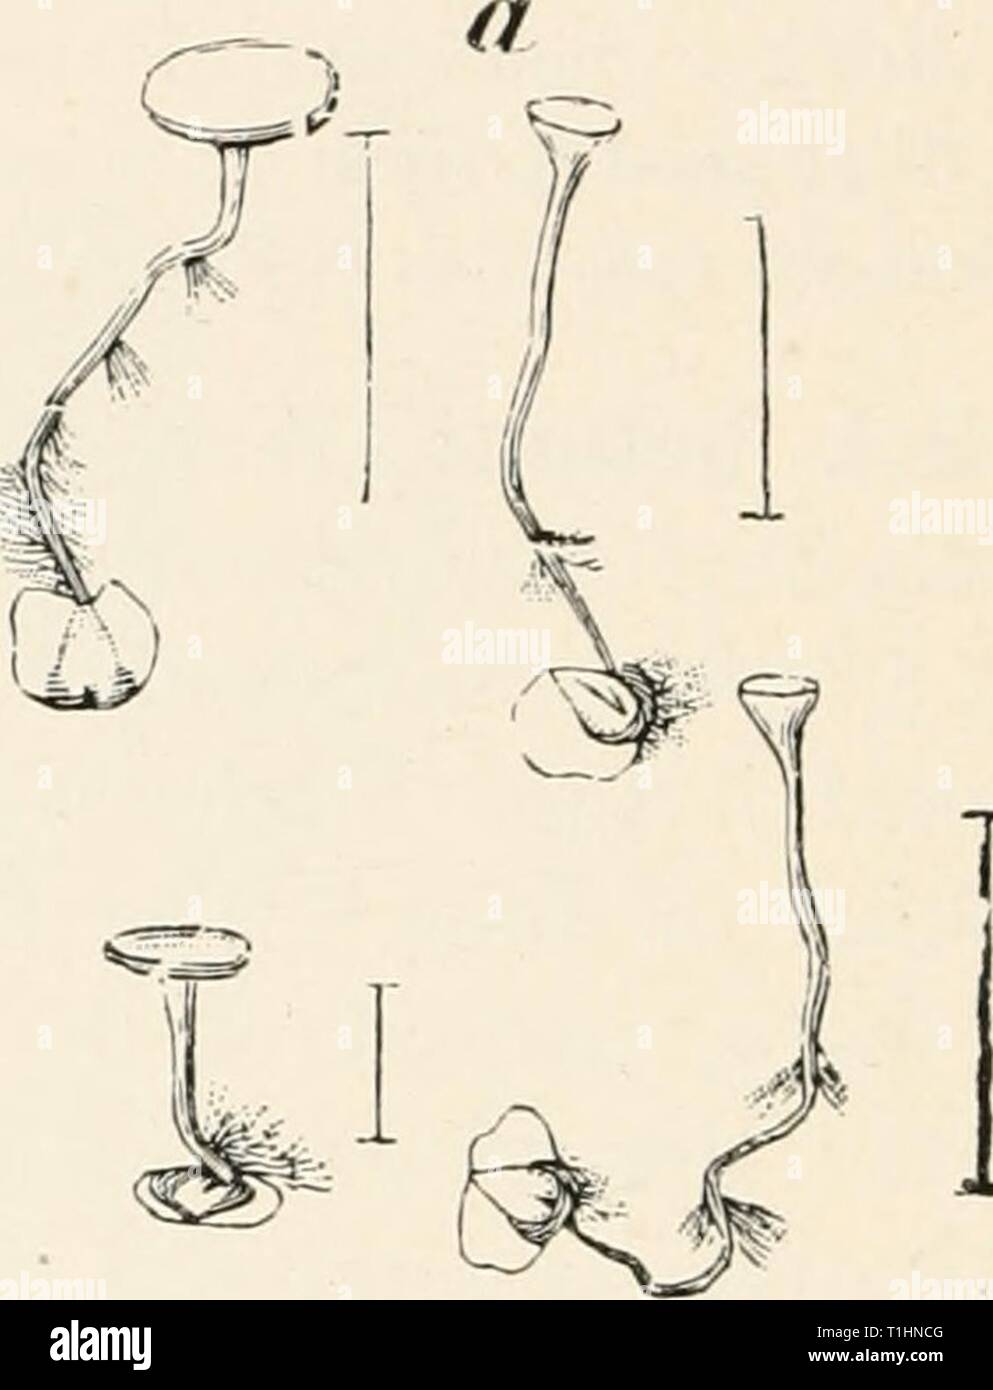 Diseases of plants induced by Diseases of plants induced by cryptogamuc parasites; introduction to the study of pathogenic fungi, slime-fungi, bacteria, and algae. English ed. by William G. Smith  diseasesofplants00tubeuoft Year: 1897  .:yyv-:    Fig. 139.—Sclerotinia hetulae. a, Birch fruits with sclerotia, which have germinated and formed cup-hke apothecial discs; rhizoids have developed on the stalks, h, Birch fruit, somewhat enlarged, with semilunar sclerotia. (After Nawaschin.) Hormoviyia hetulae Wtz. often occurs along with the above. It causes the production of thick spherical fruits w Stock Photo